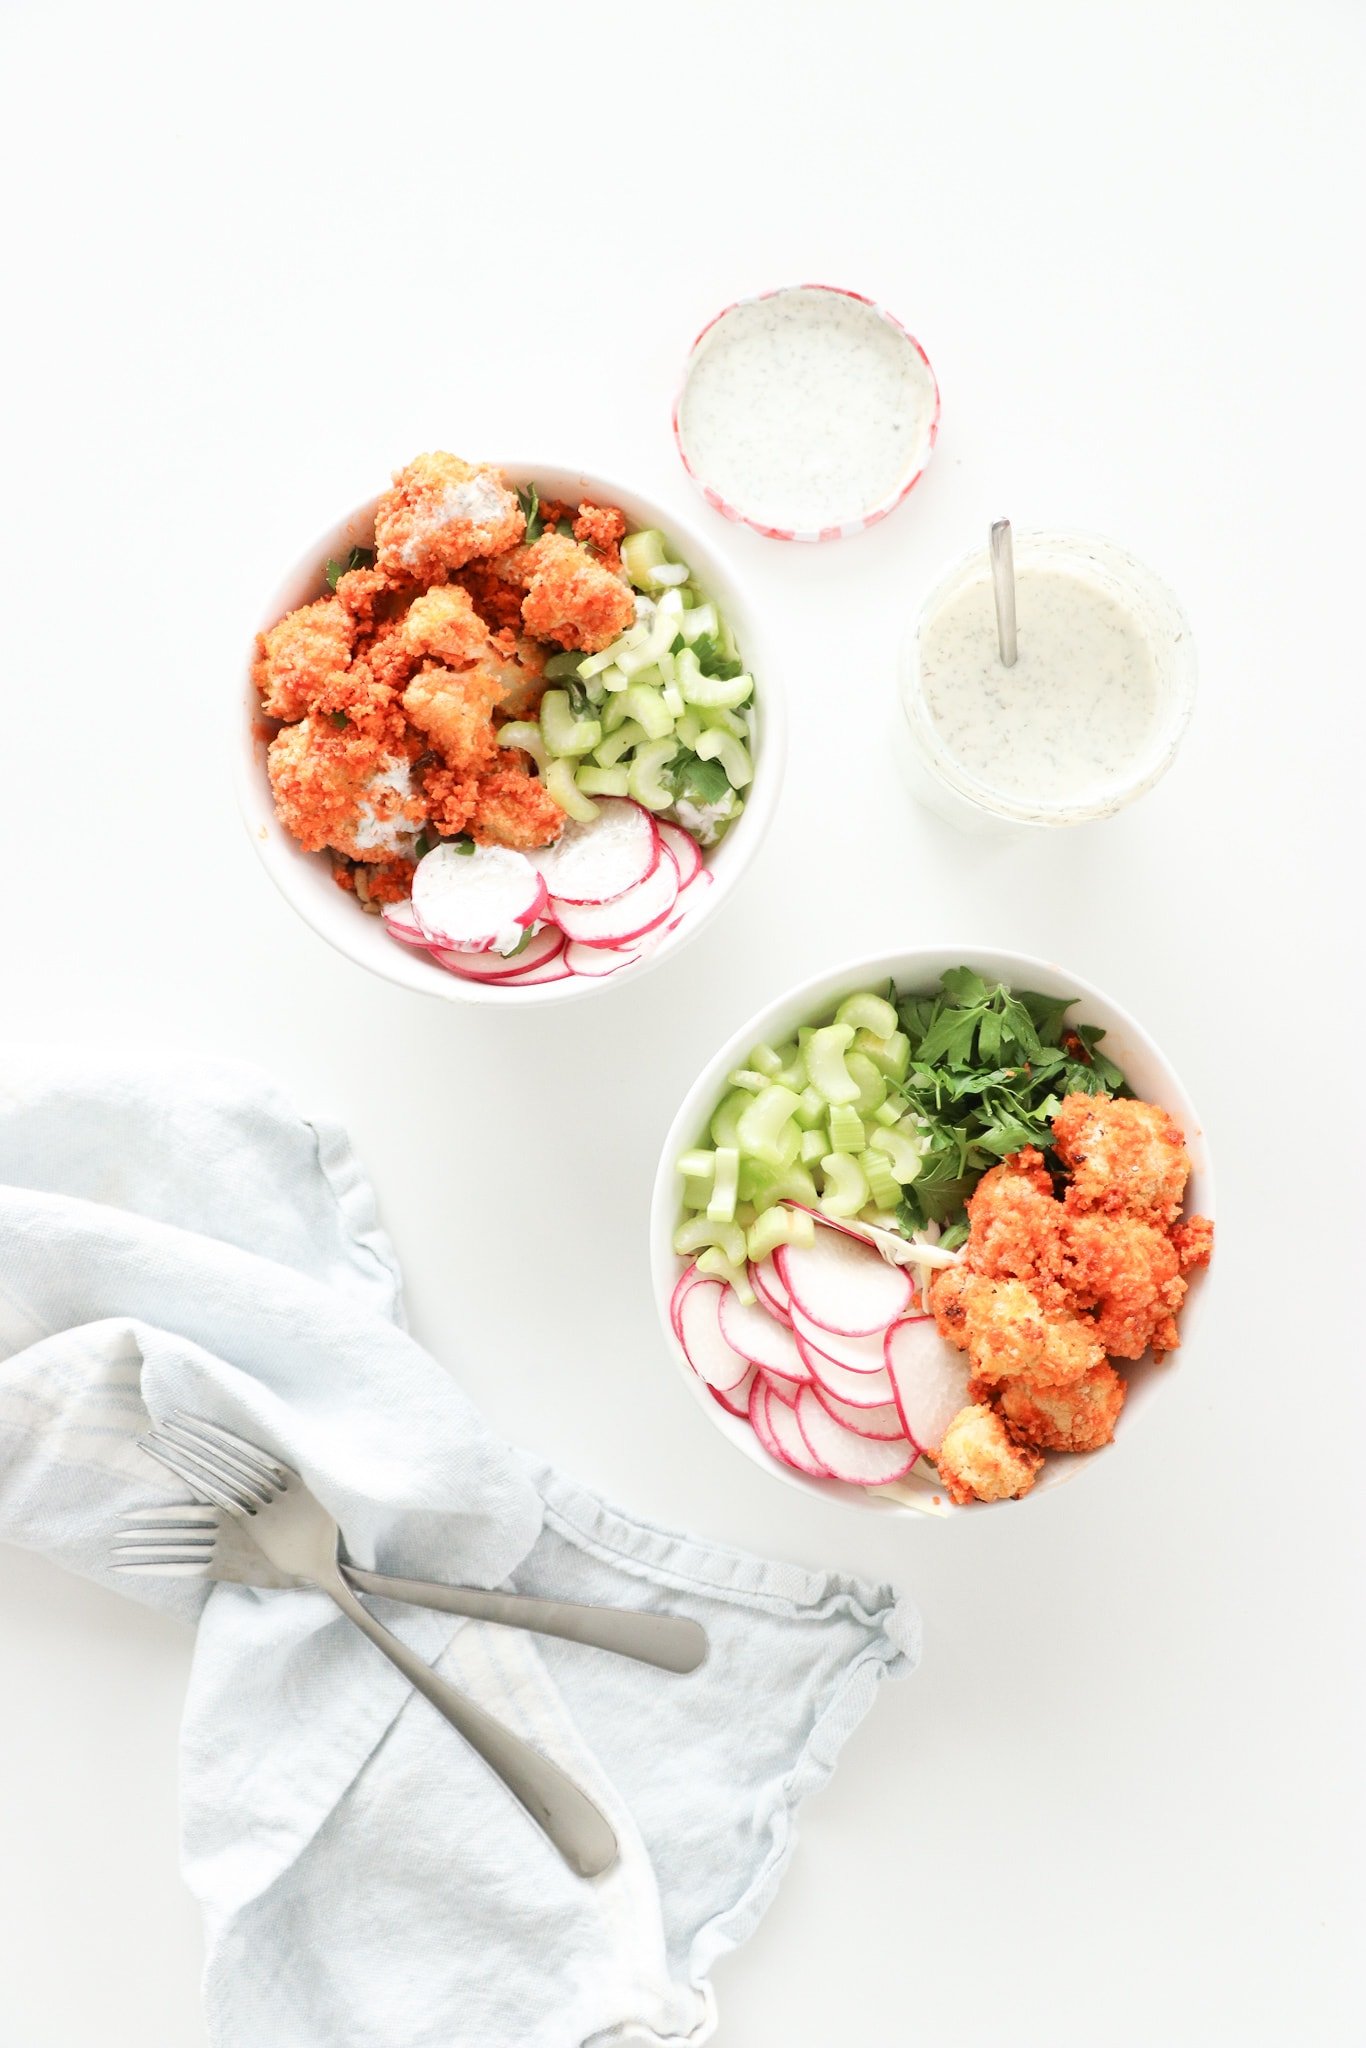 Two white bowls on a white surface with baked buffalo cauliflower, greens, and watermelon radish with a light blue kitchen towel and jar of homemade ranch dressing.